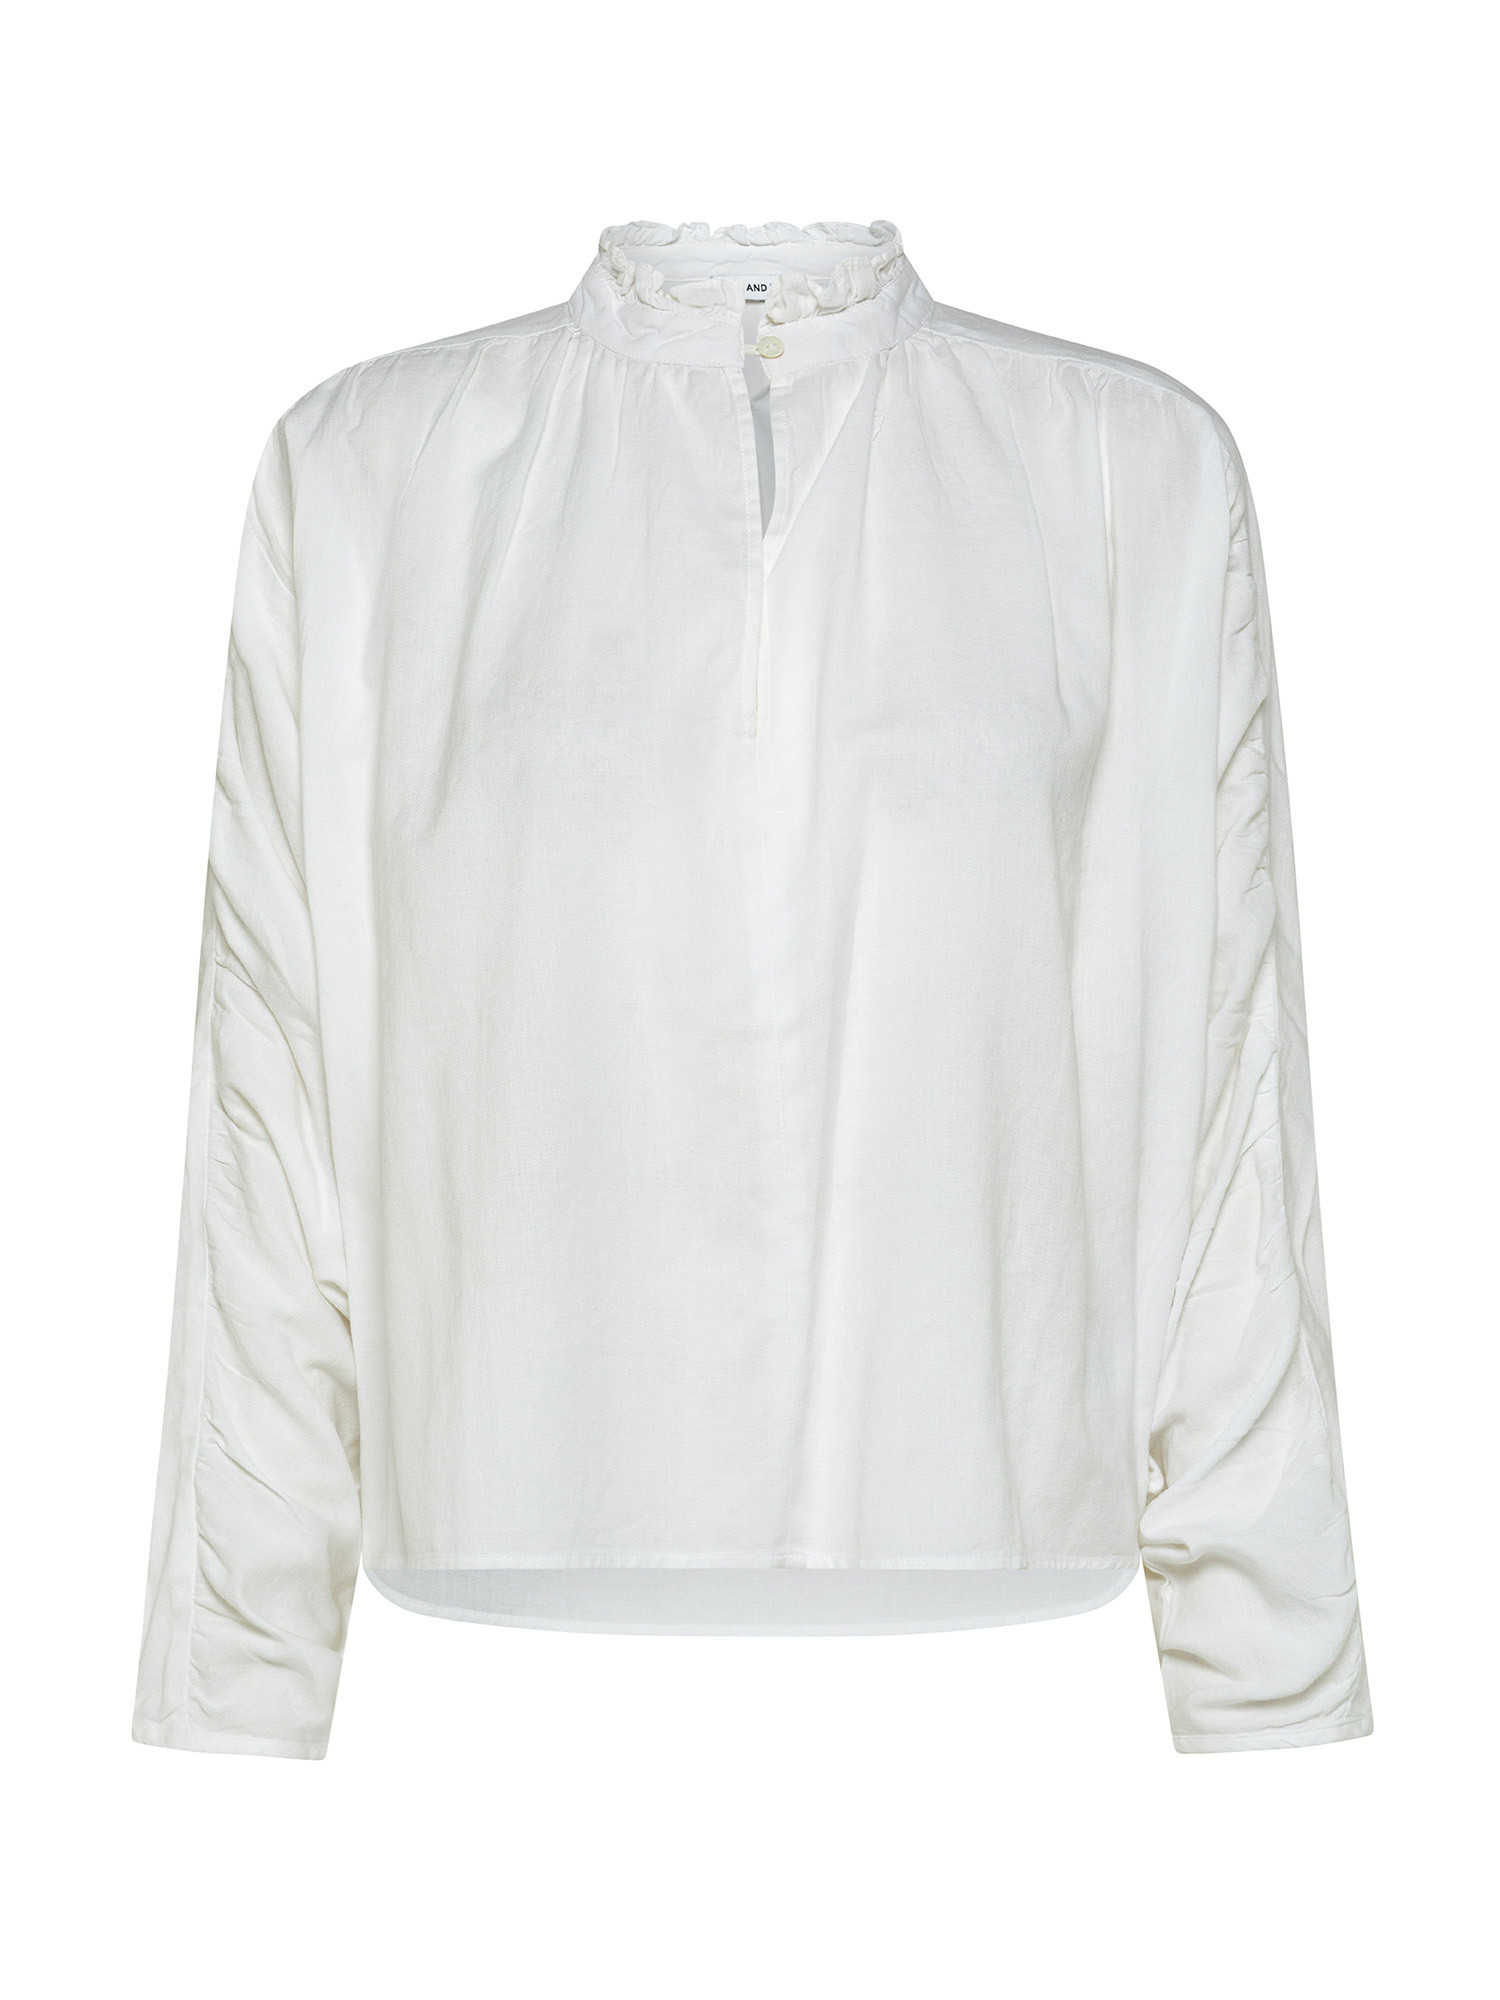 Blouse in cotton with long sleeves, White, large image number 0